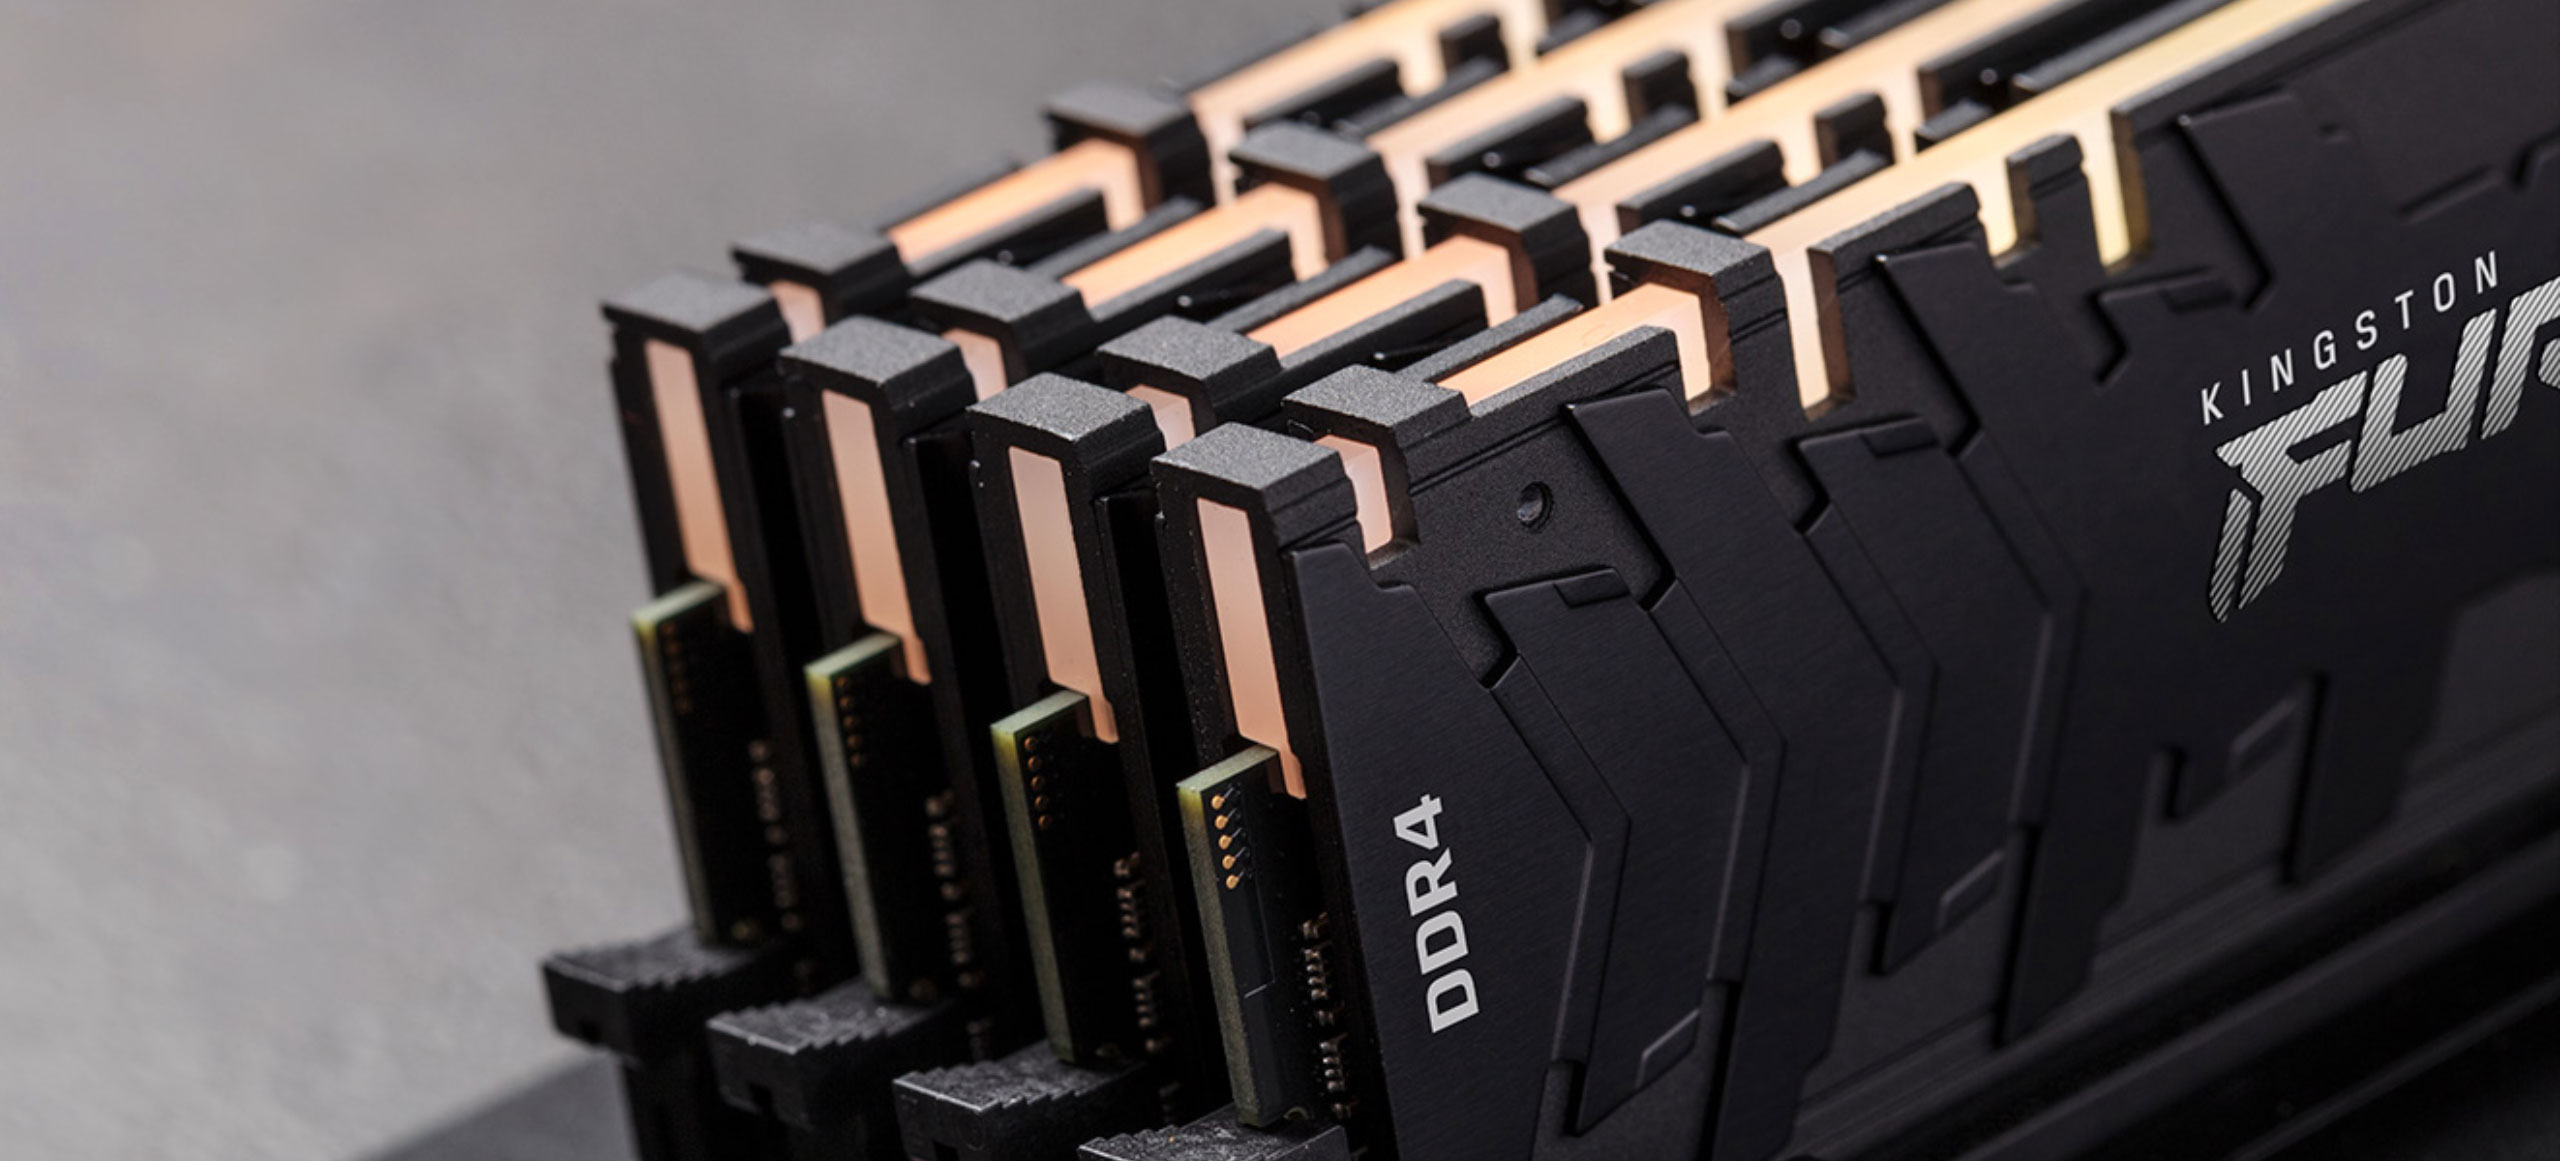 Kingston FURY Renegade DDR4 memory reaches up to 5333MHz